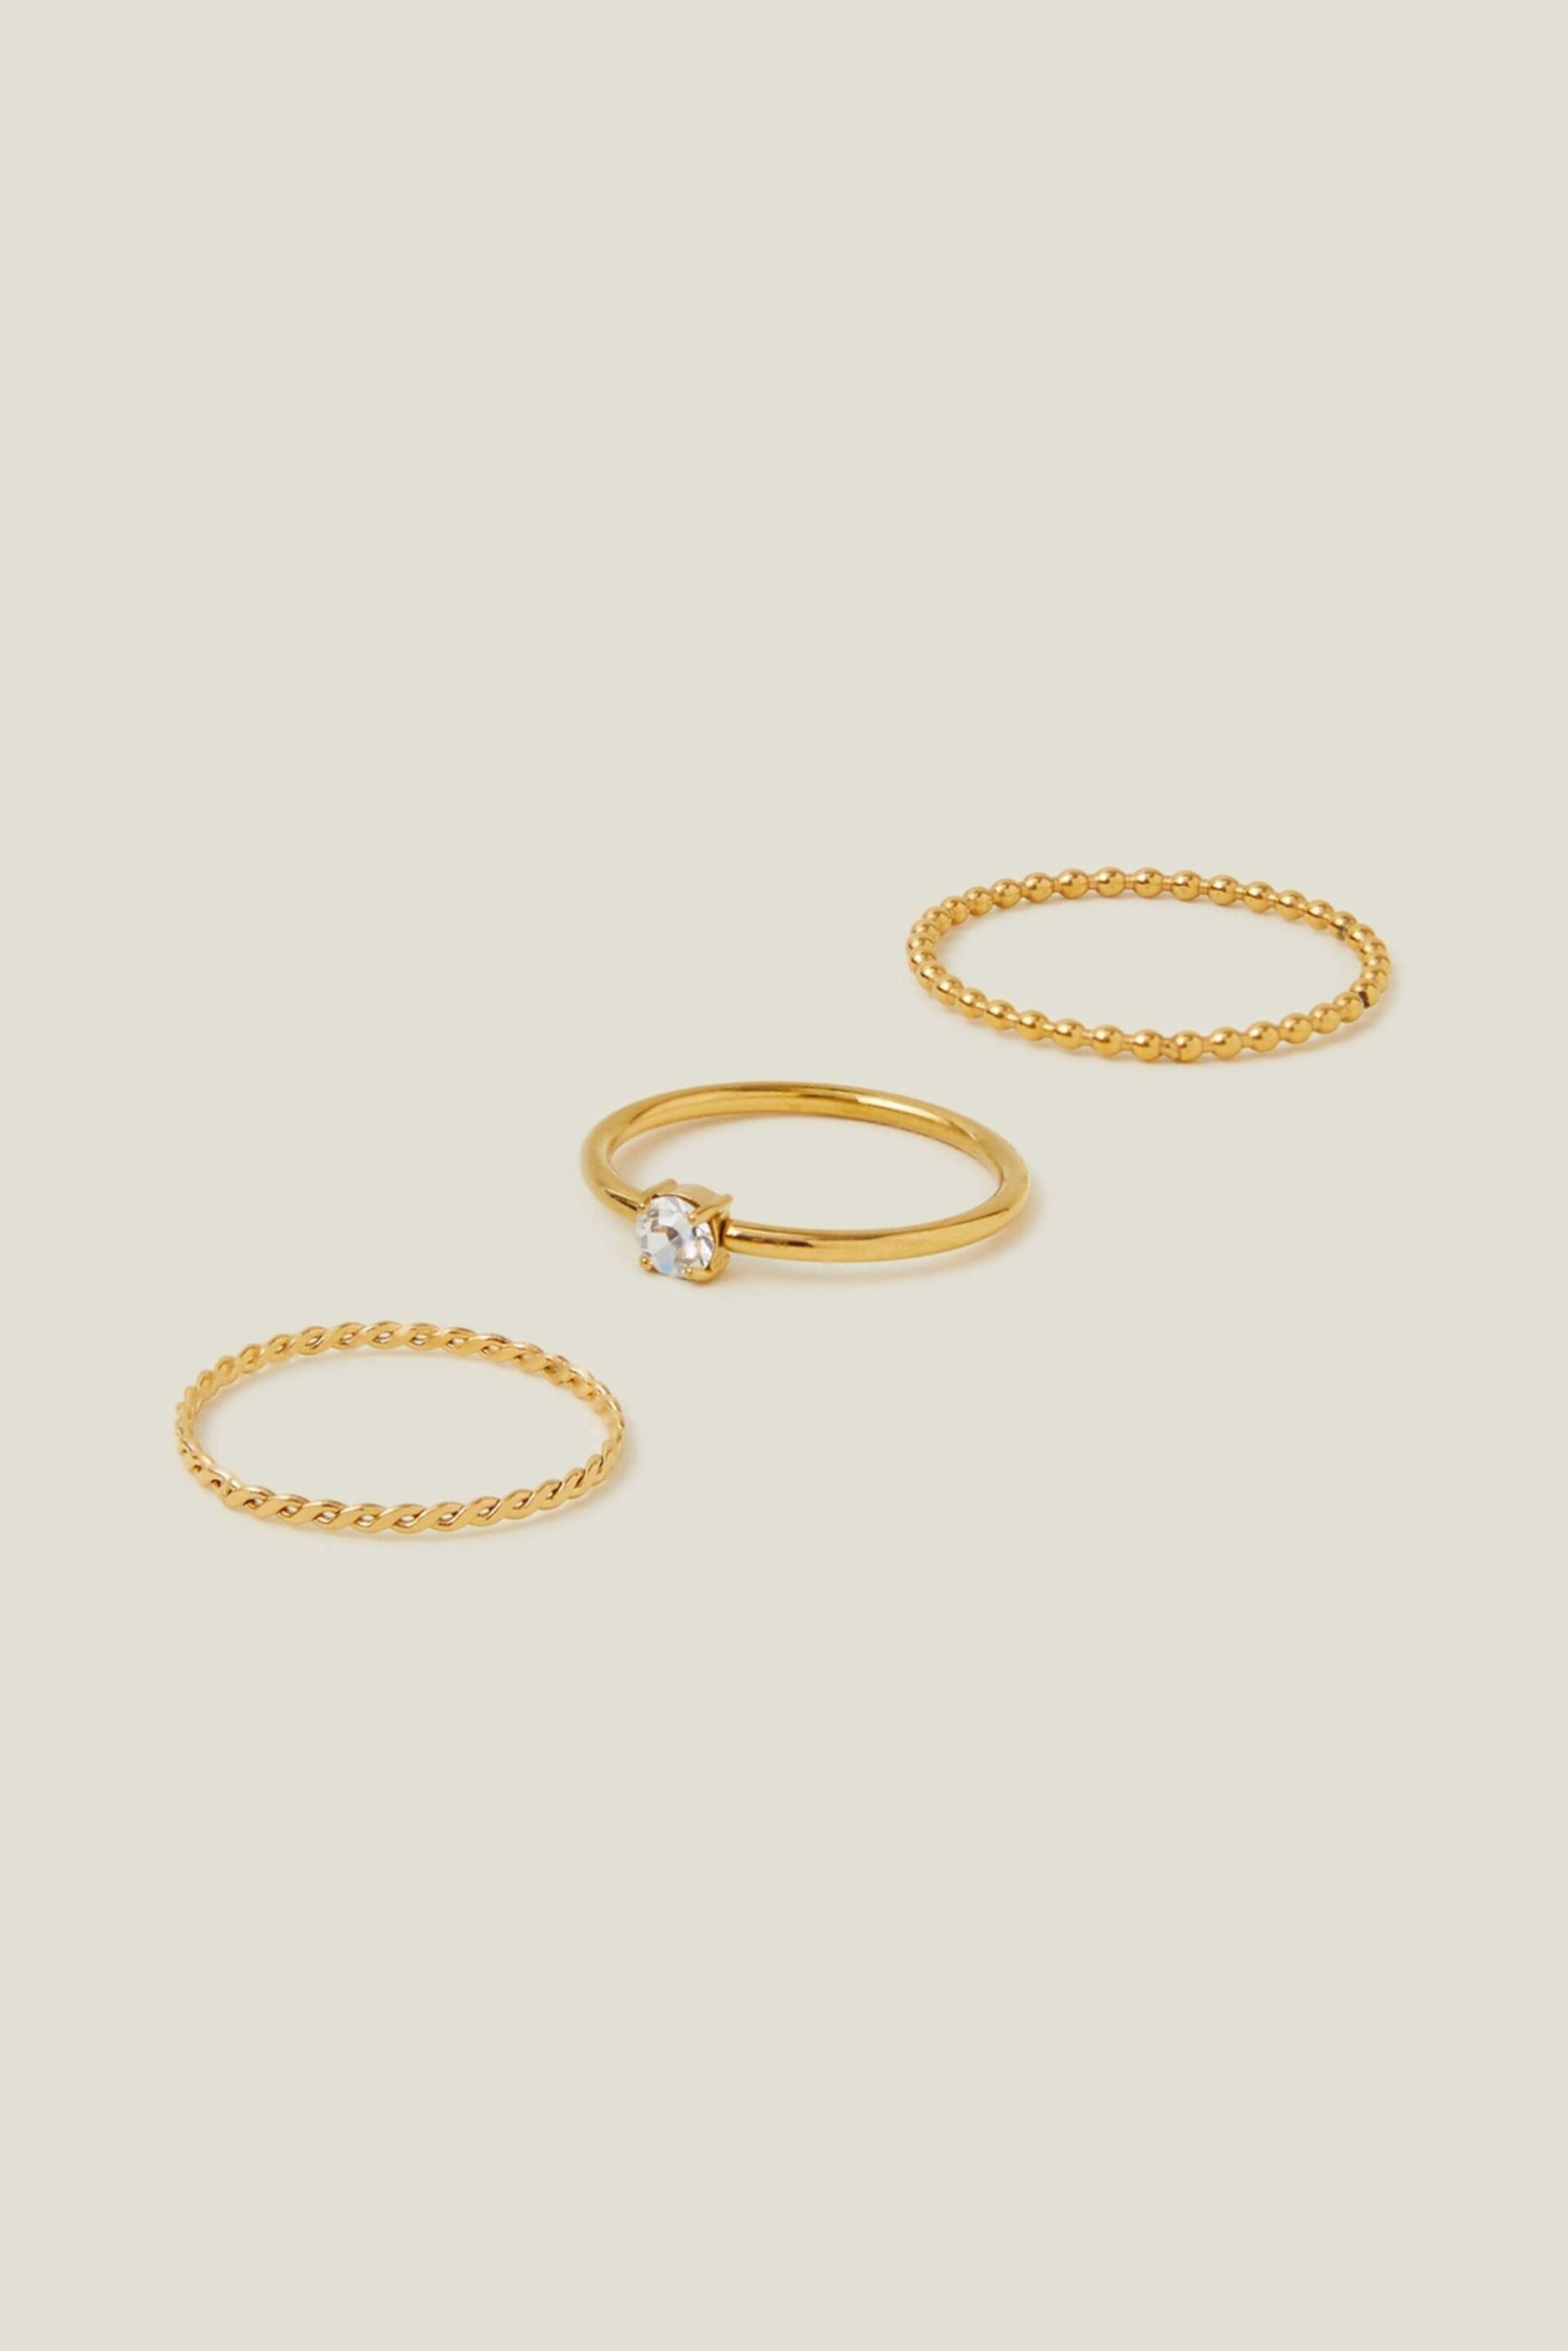 Accessorize Gold Tone Stainless Steel Rings 3 Pack - Image 1 of 3